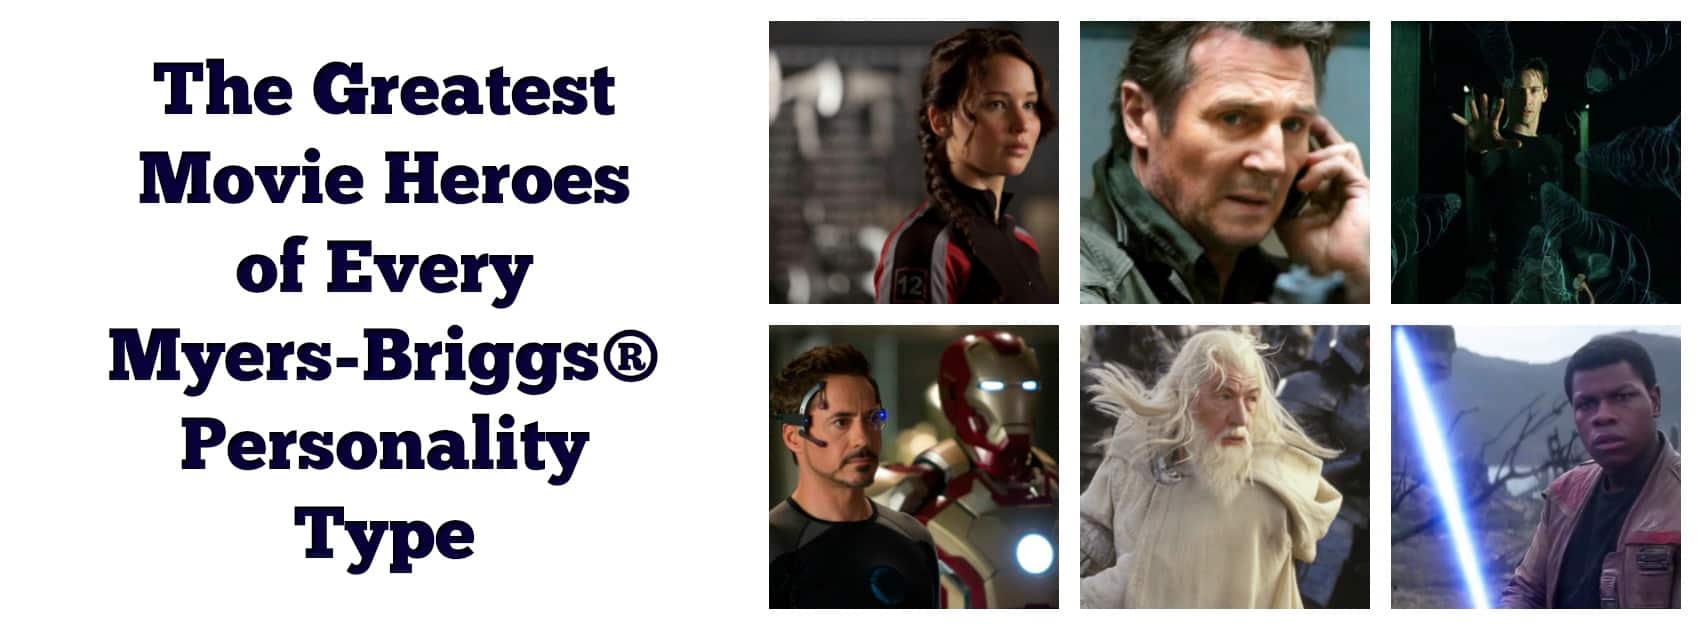 Which Marvel Character Are You, Based On Your MBTI Type?